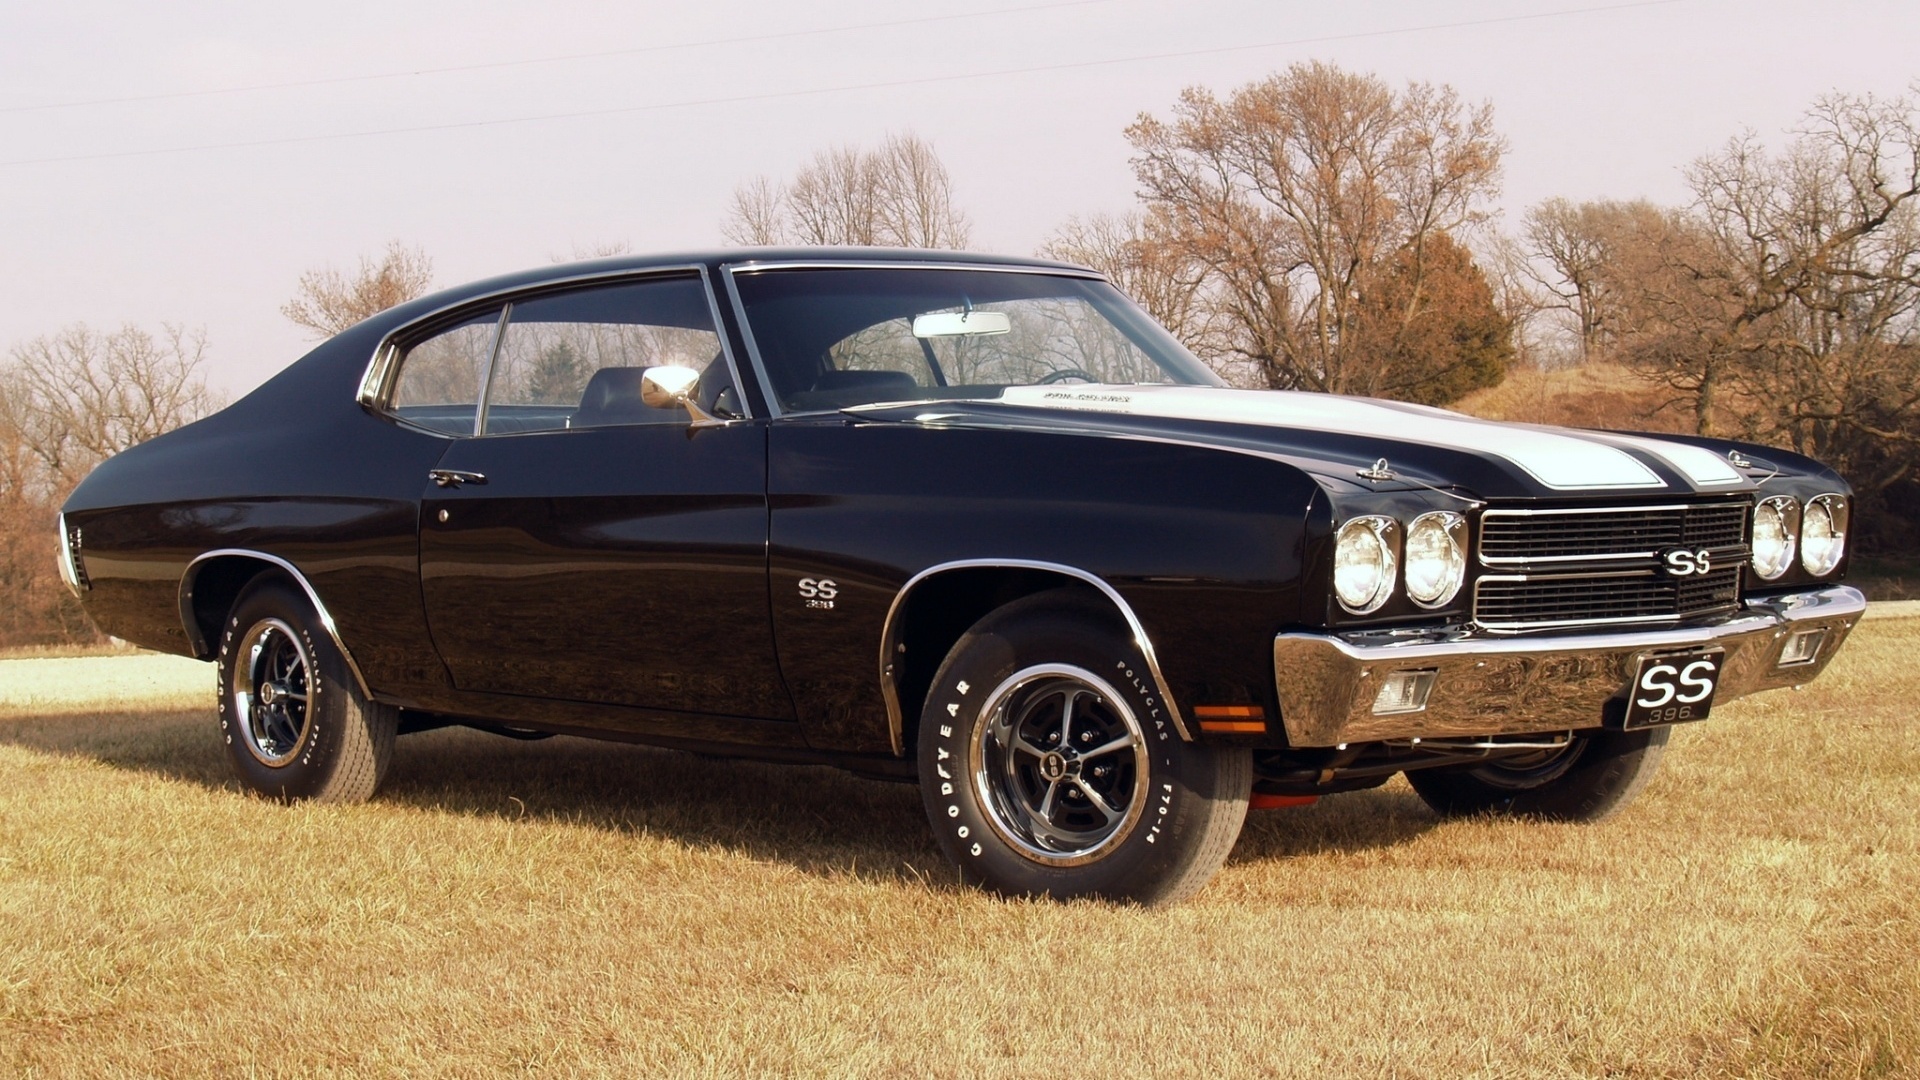 hardtop, Chevrolet, , 1970, 396, , chevelle, coupe, ss, 